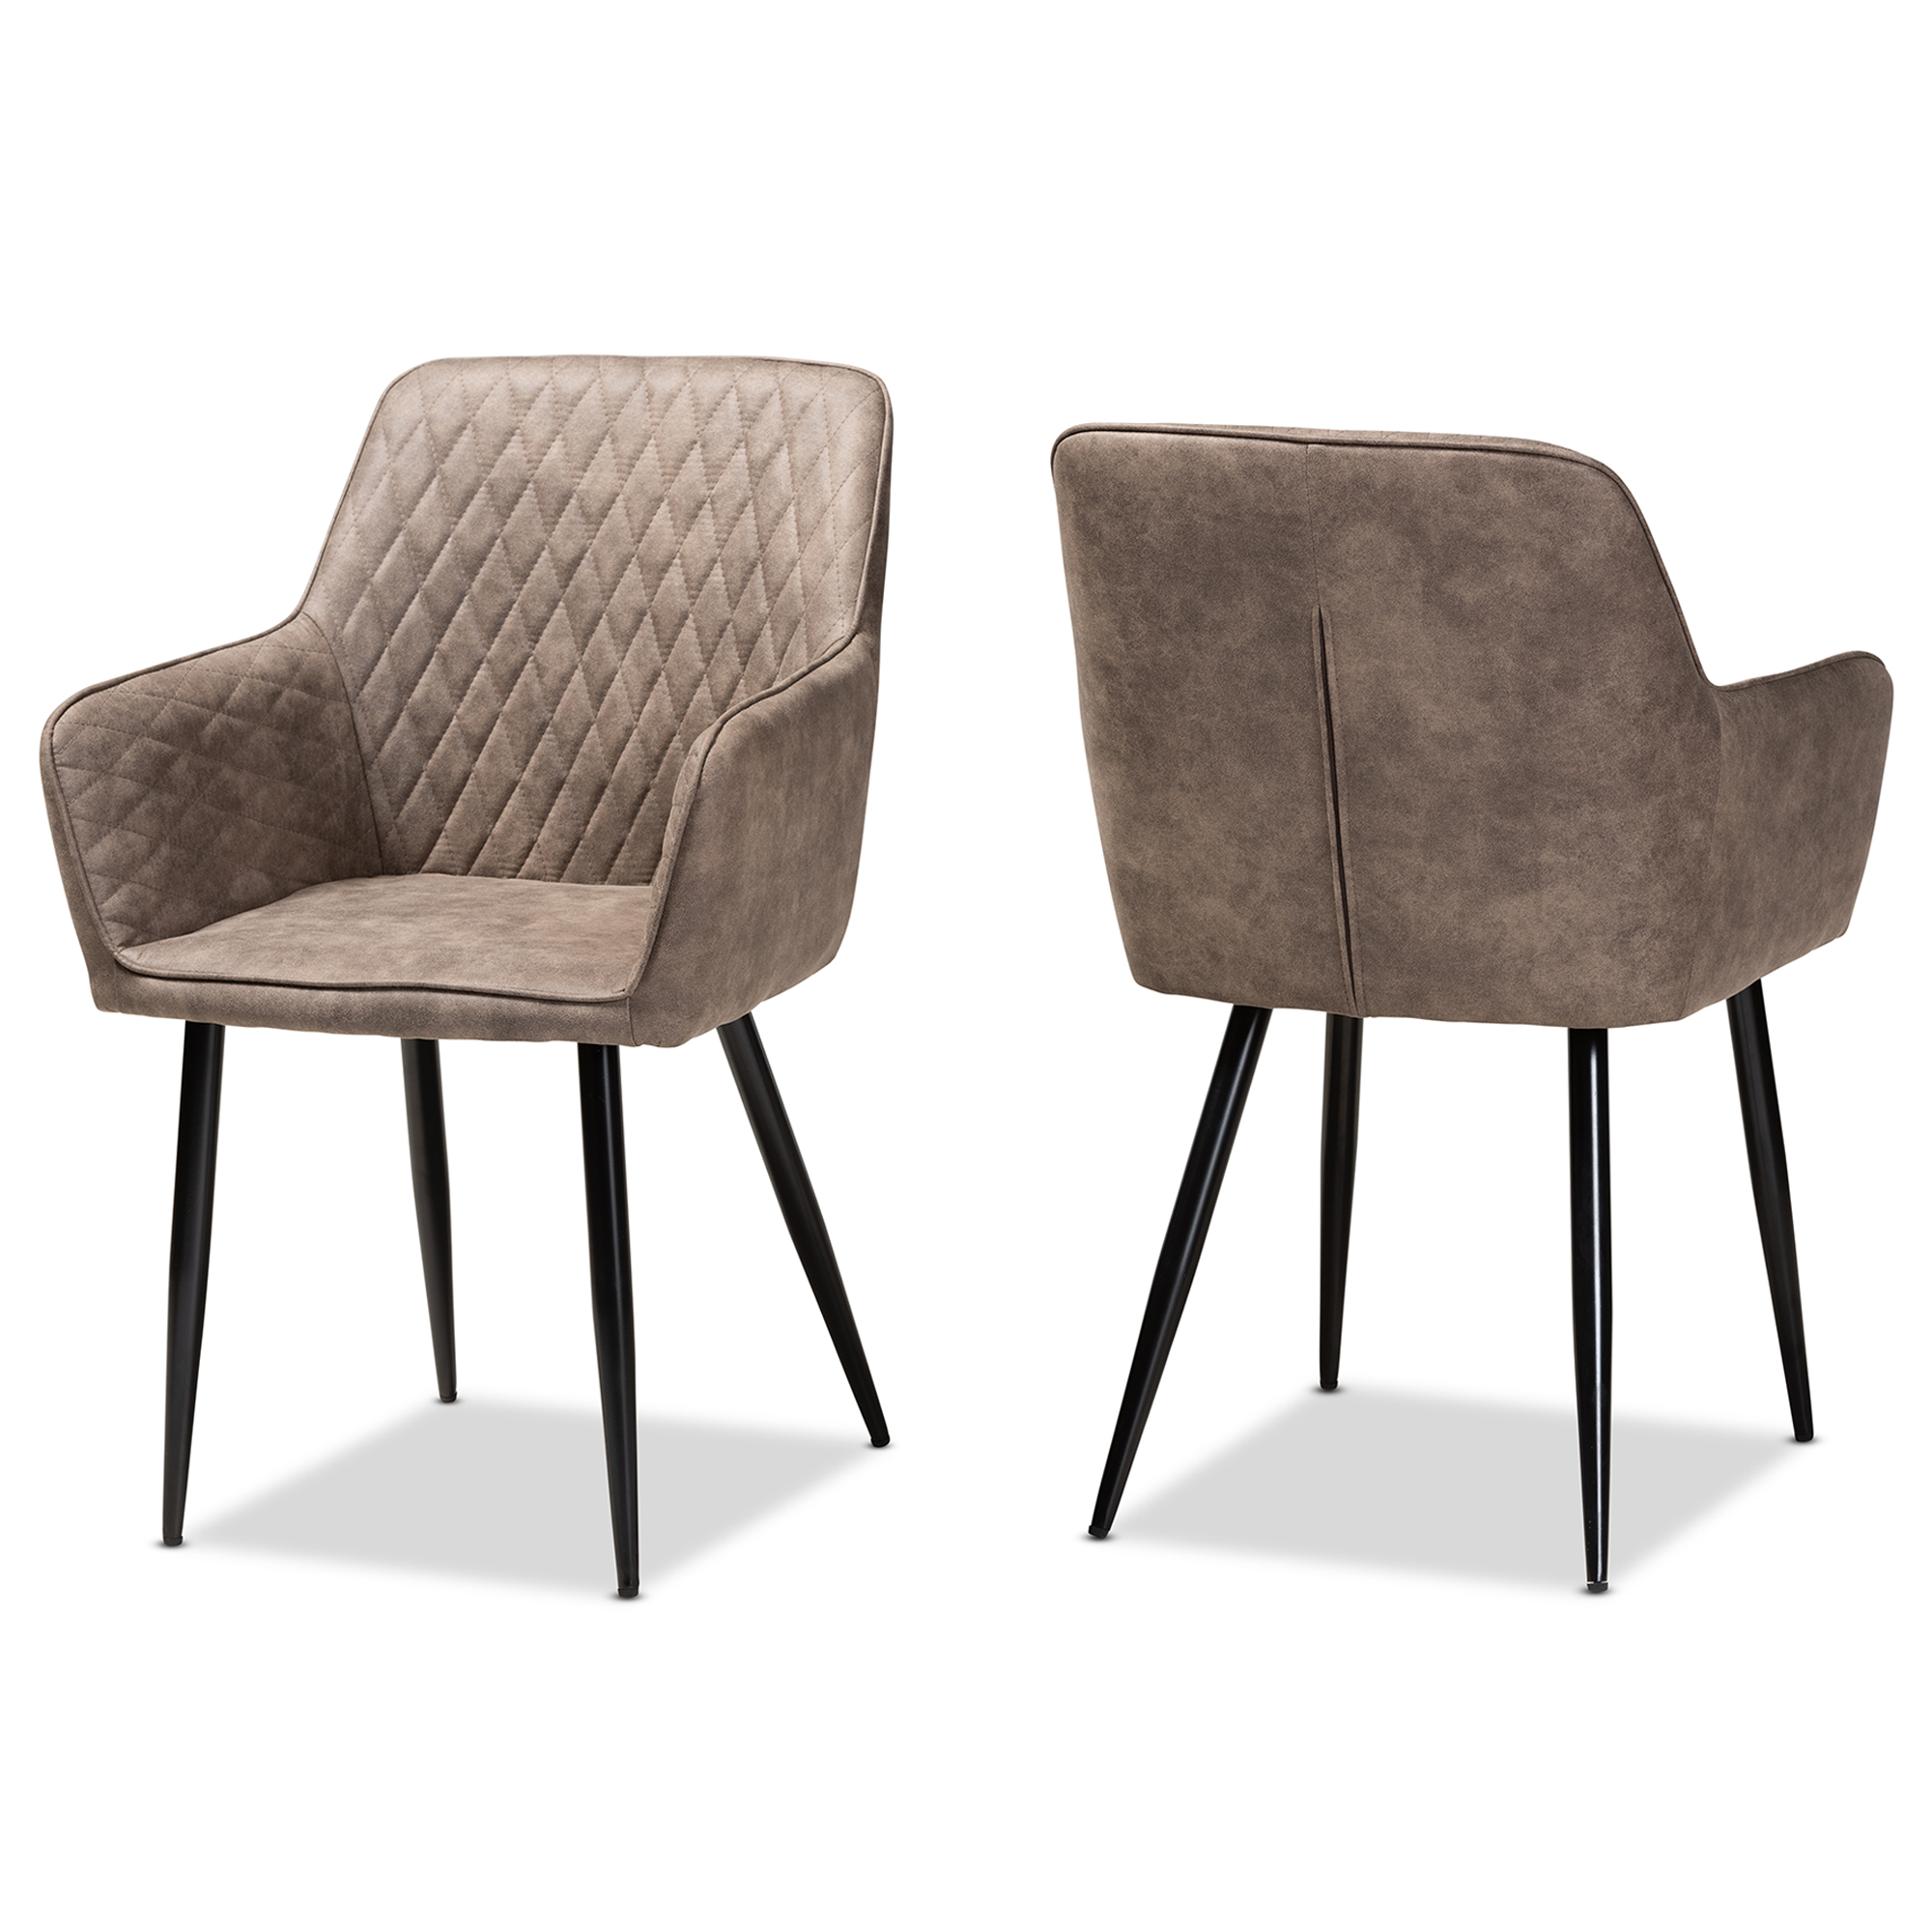 Baxton Studio Belen Modern and Contemporary Grey and Brown Imitation Leather Upholstered 2-Piece Metal Dining Chair Set Affordable modern furniture in Chicago, classic dining room furniture, modern dining chair, cheap dining chair